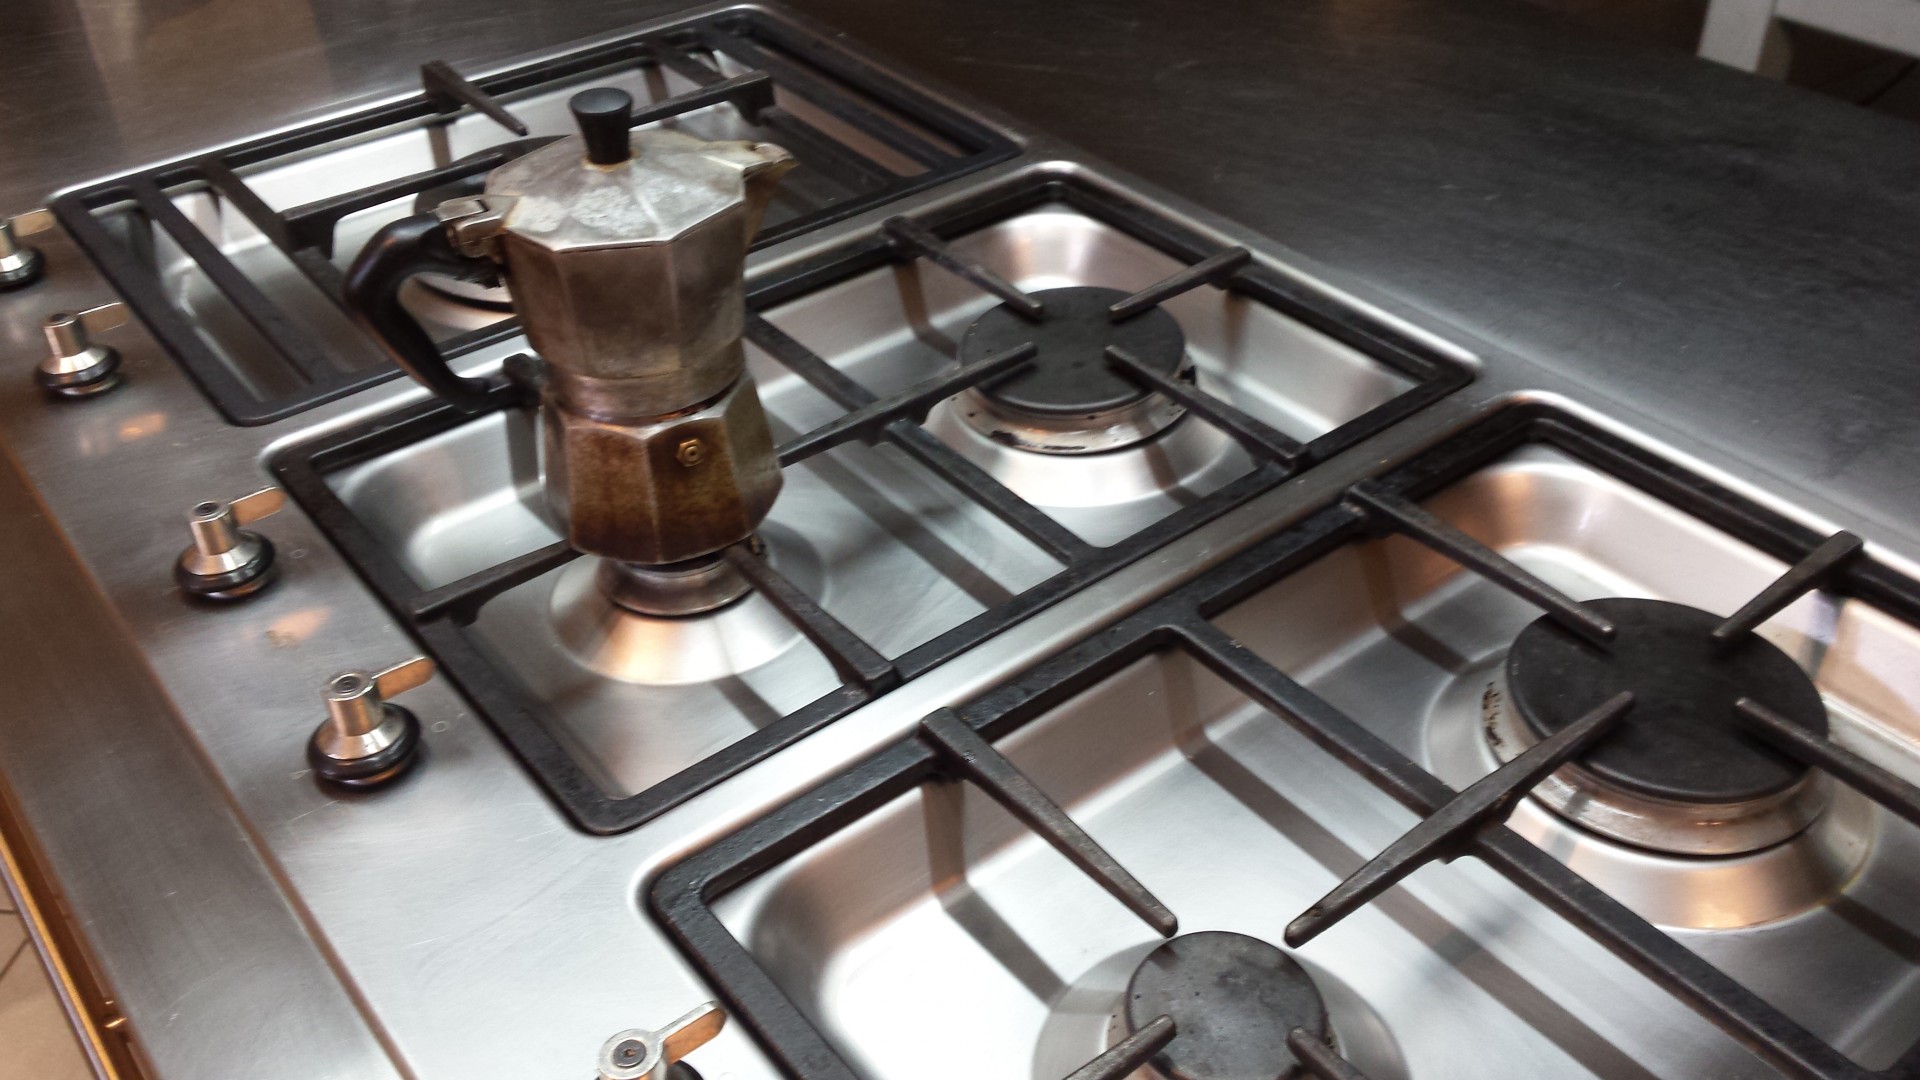 How to choose a gas stove - Cooking in Toscana